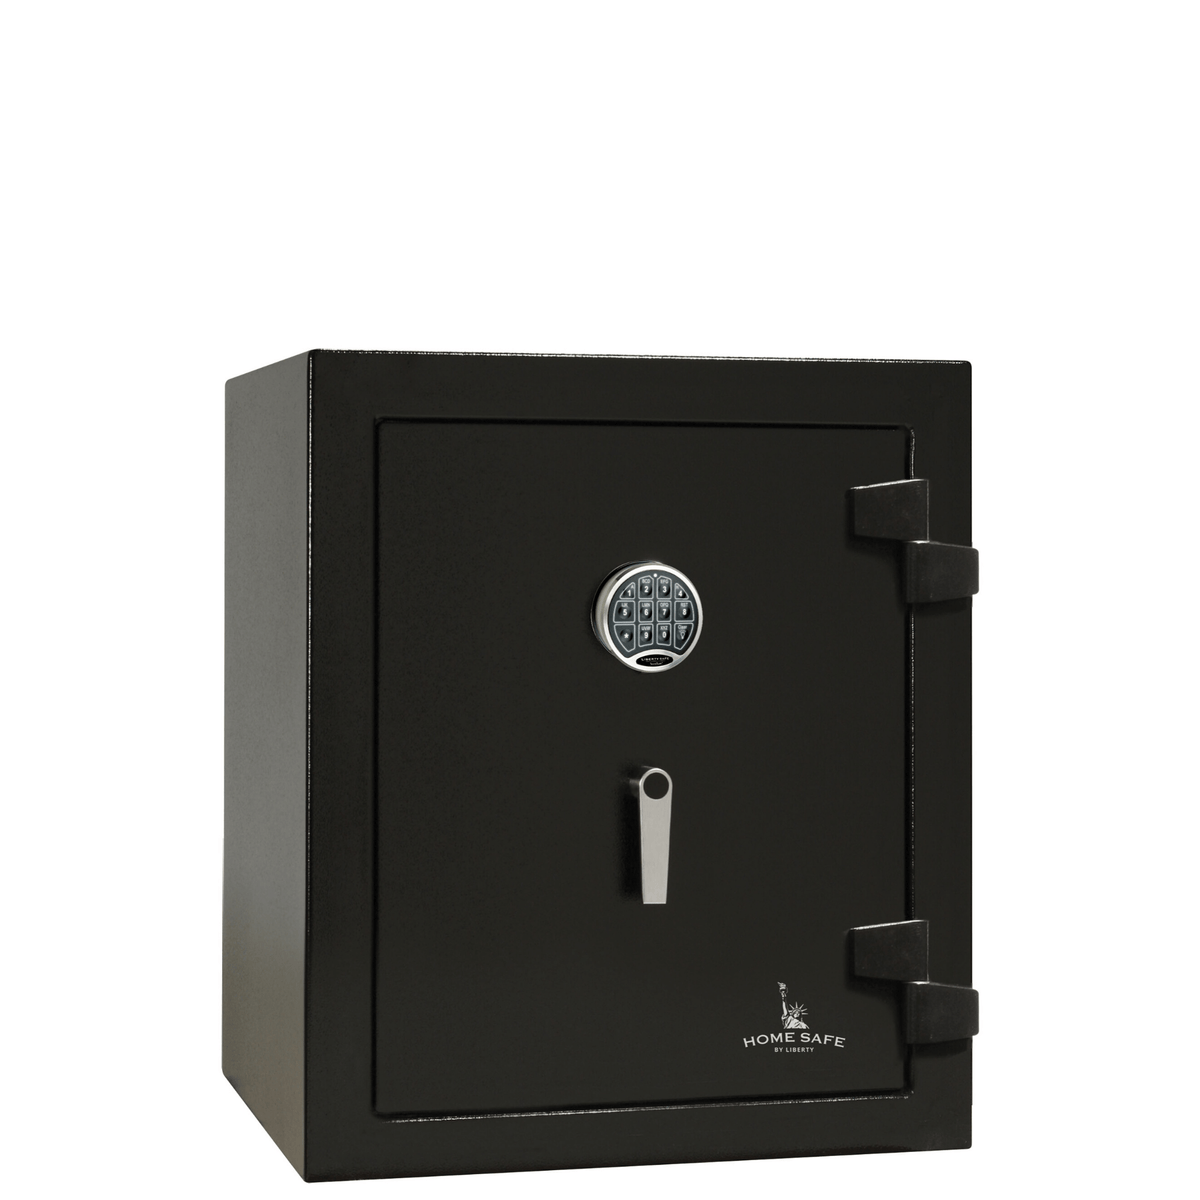 Home Safe Series | 60 Minute Fire Protection | 8 | Dimensions: 30&quot;(H) x 24.25&quot;(W) x 22&quot;(D) | Black Textured | Electronic Lock